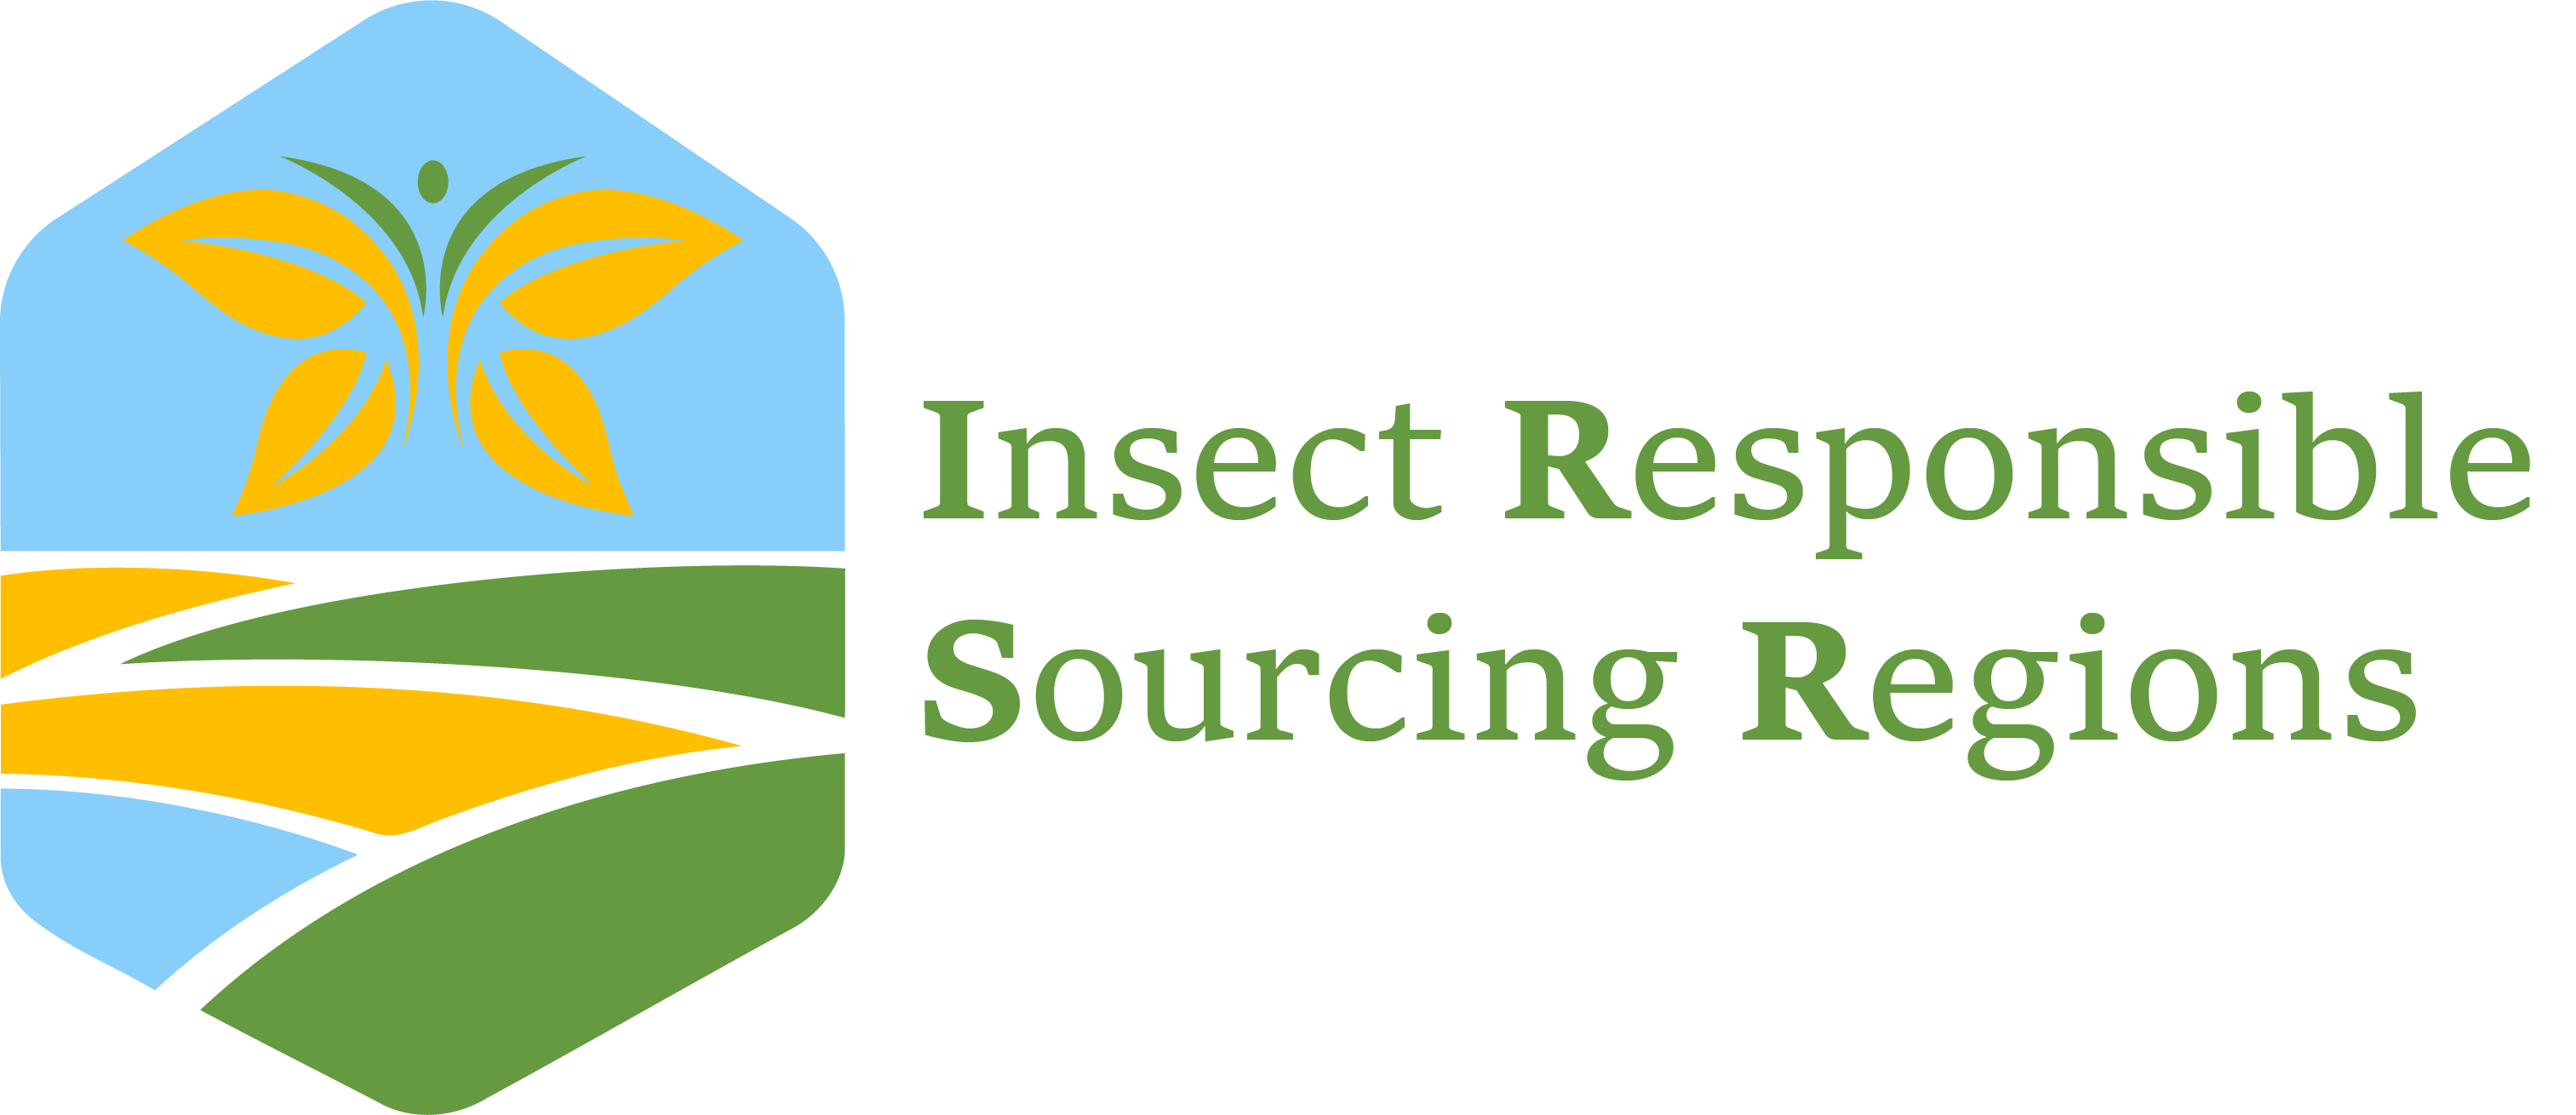 Insect Responsible Sourcing Regions